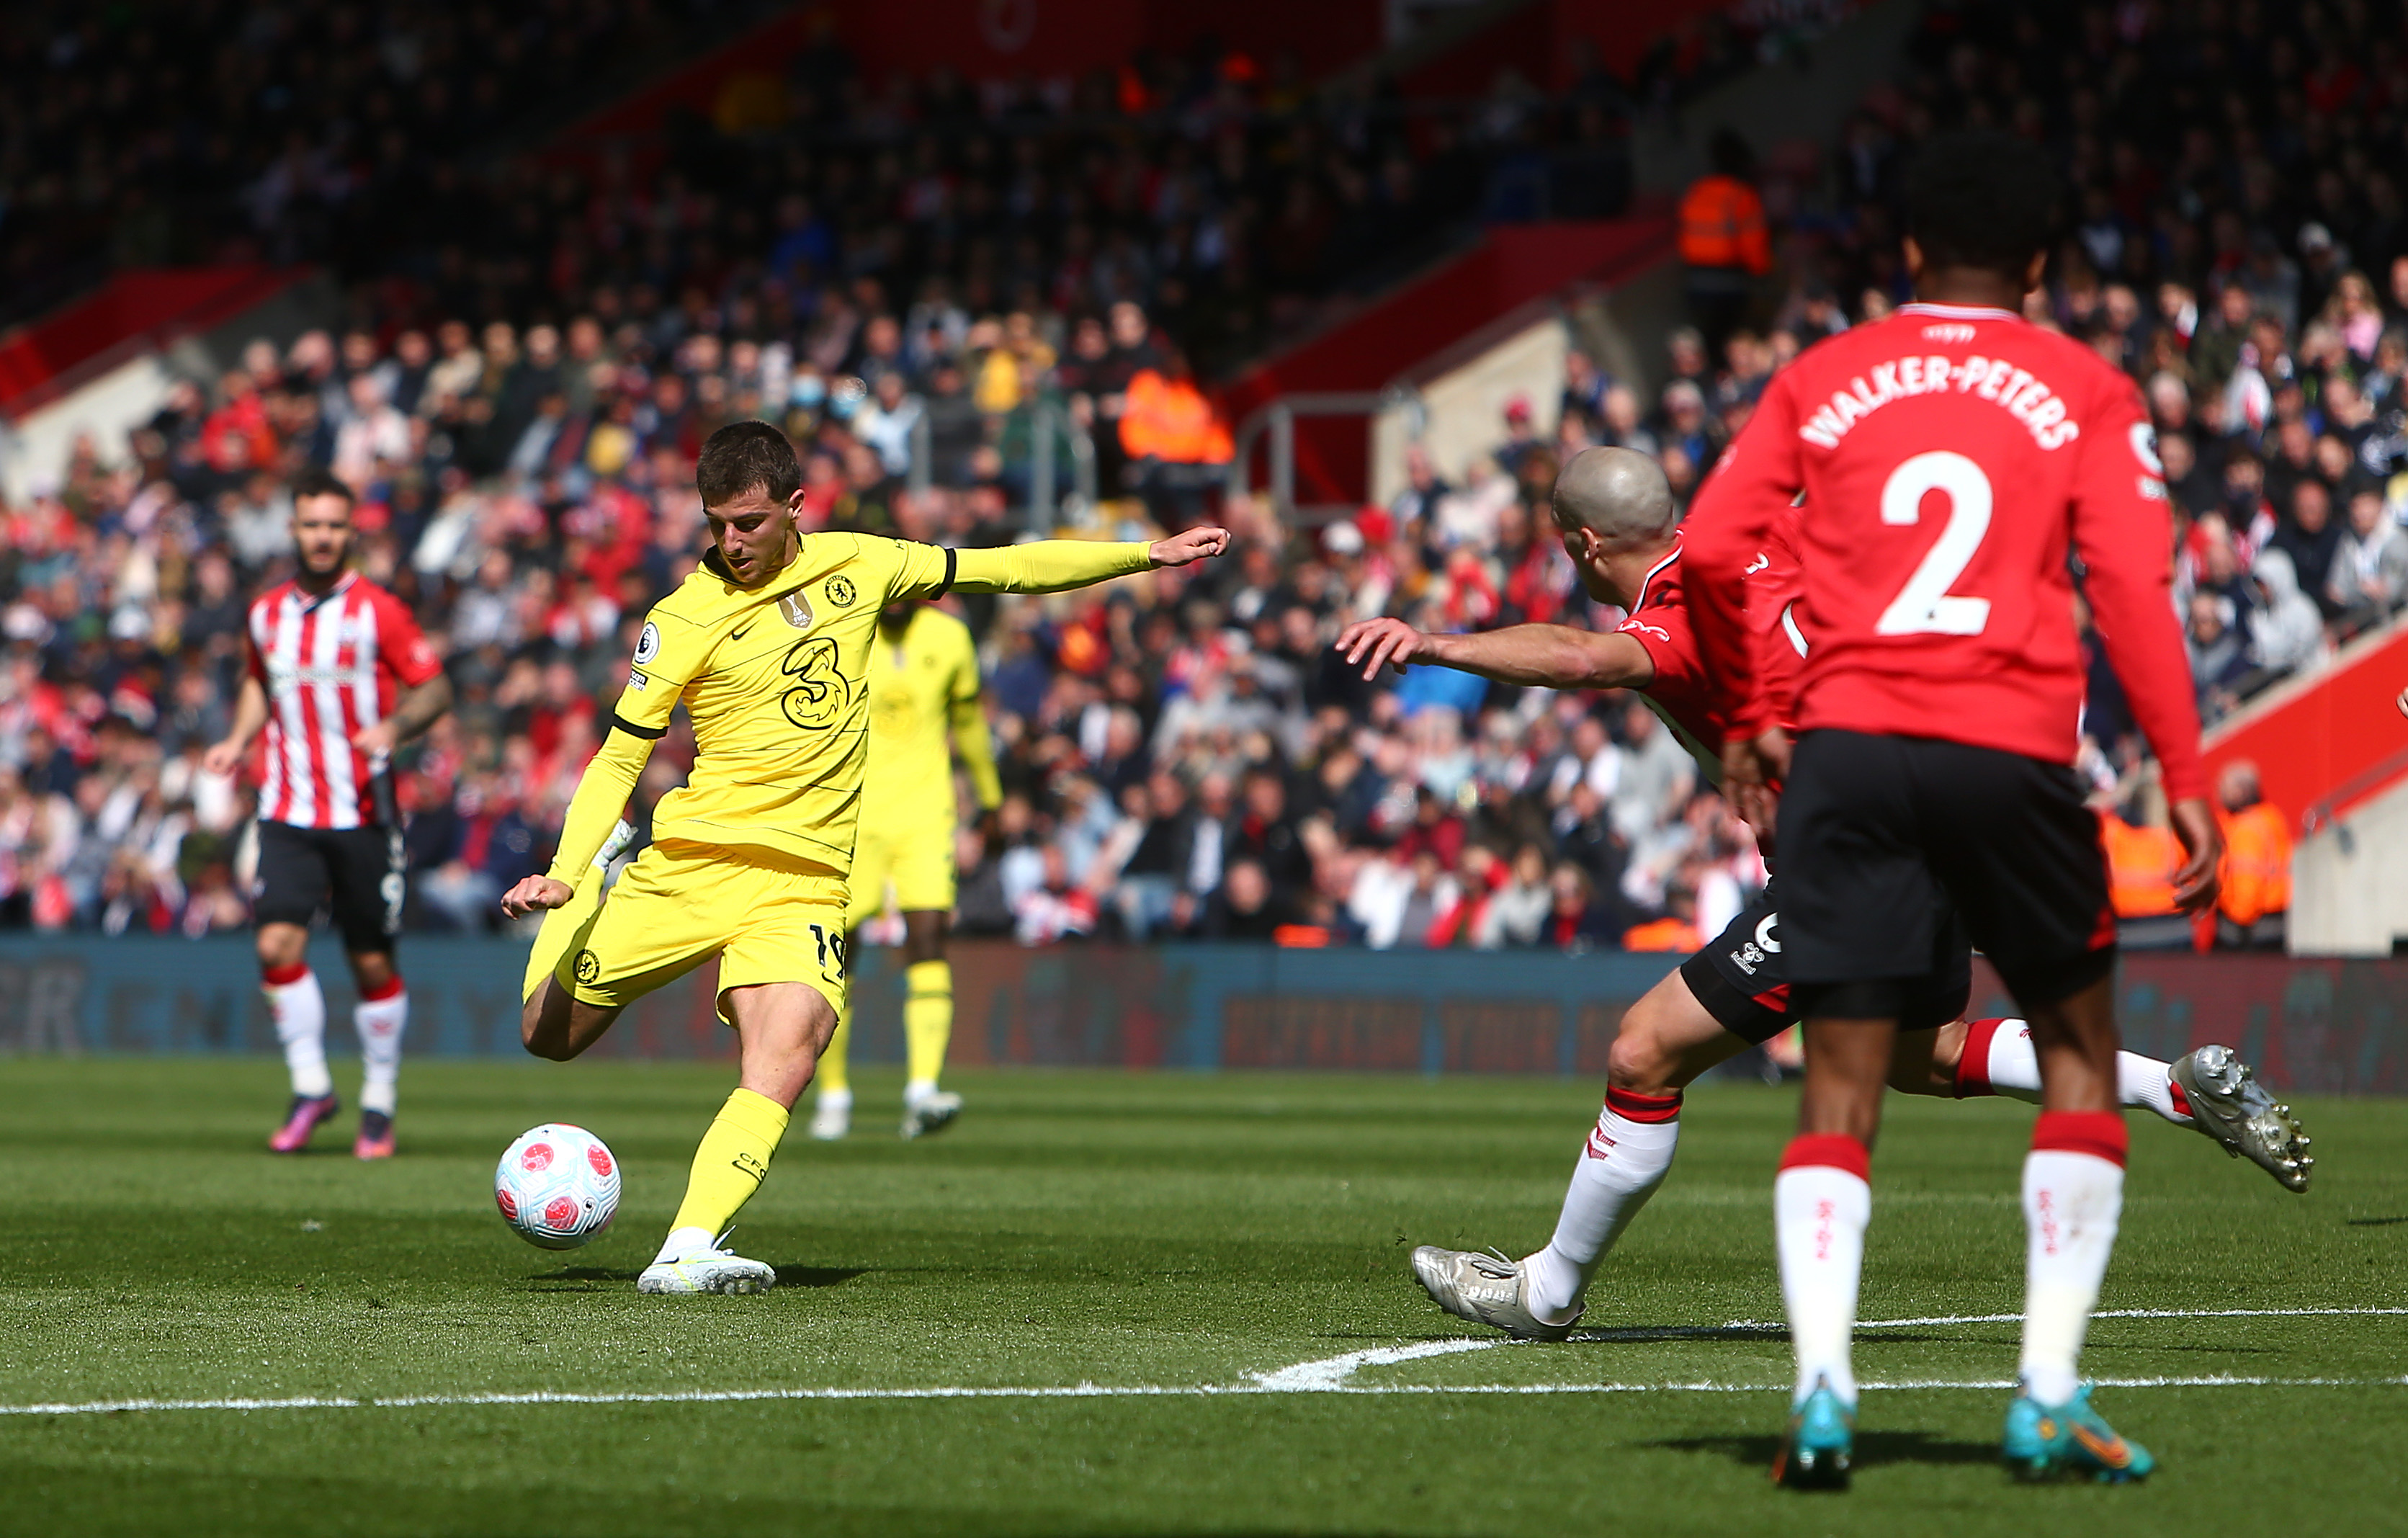 Premier League 2021/22: RUTHLESS Chelsea run riot at St. Mary's as Timo Werner and Mason Mount score a brace, Chelsea beat Southampton 6-0: CHECK HIGHLIGHTS